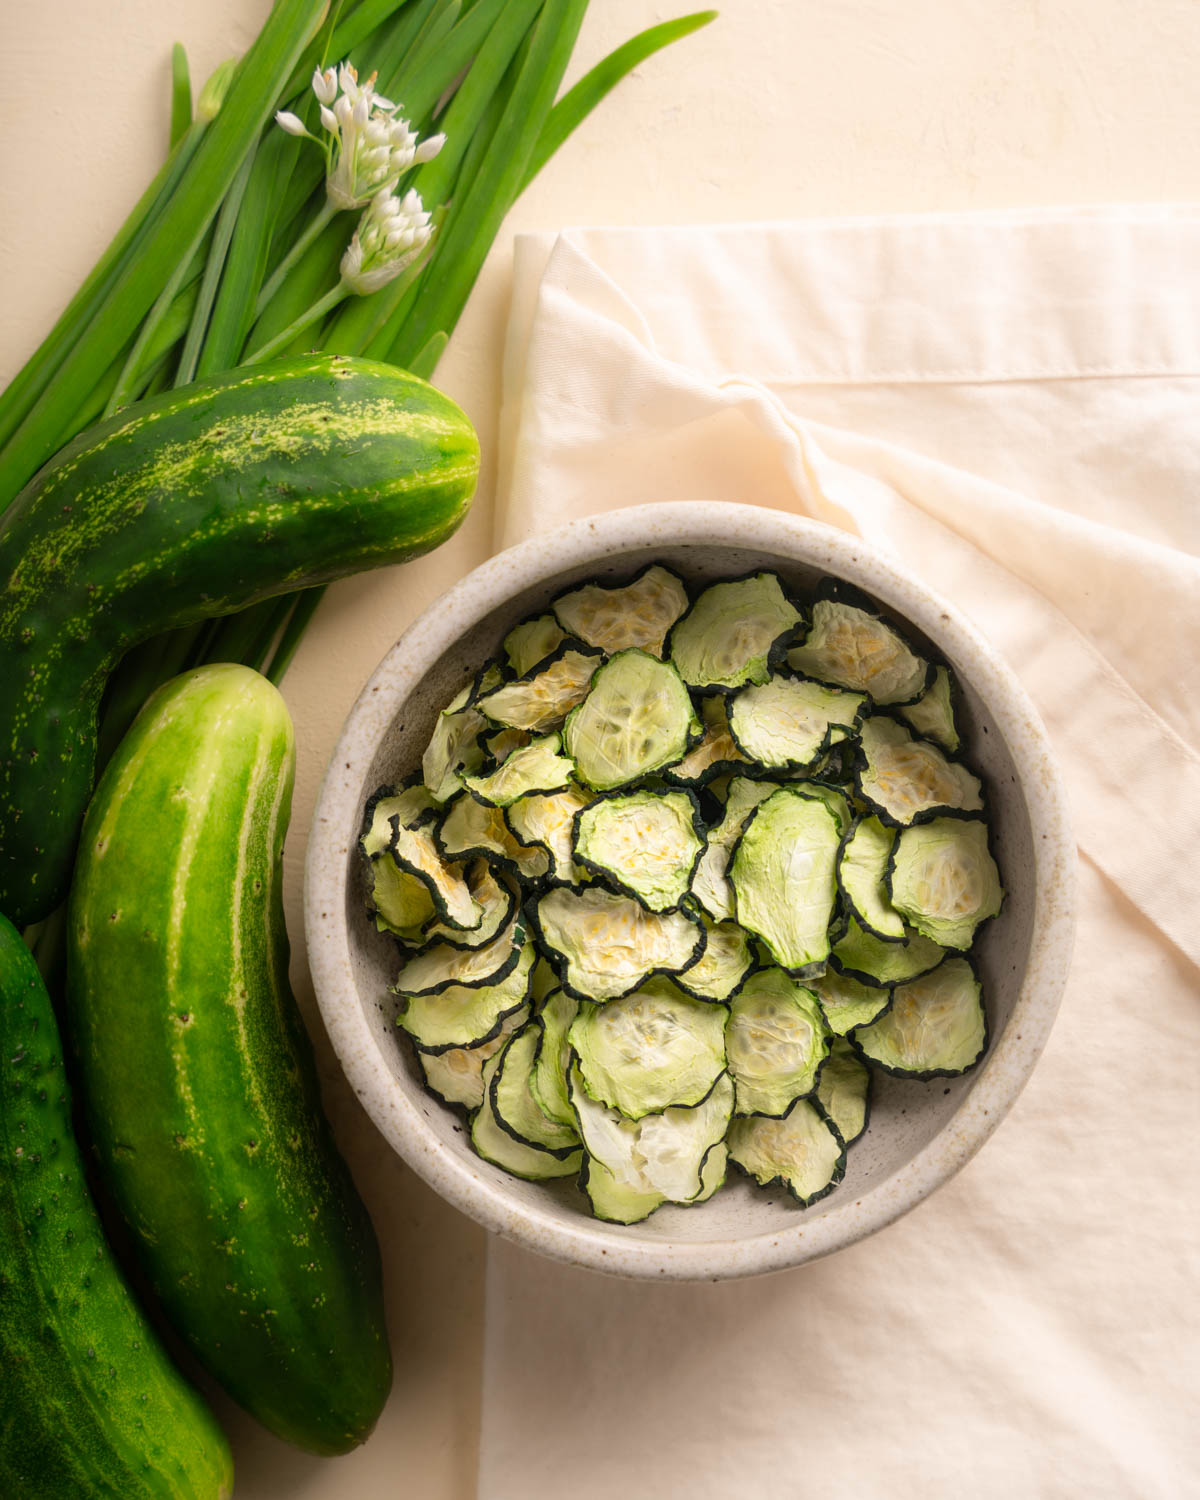 Dehydrated cucumbers (cucumber chips) in a bowl. There are cucumber and chionese garlic leek with white flower tops as props to the left side of the bowl. 